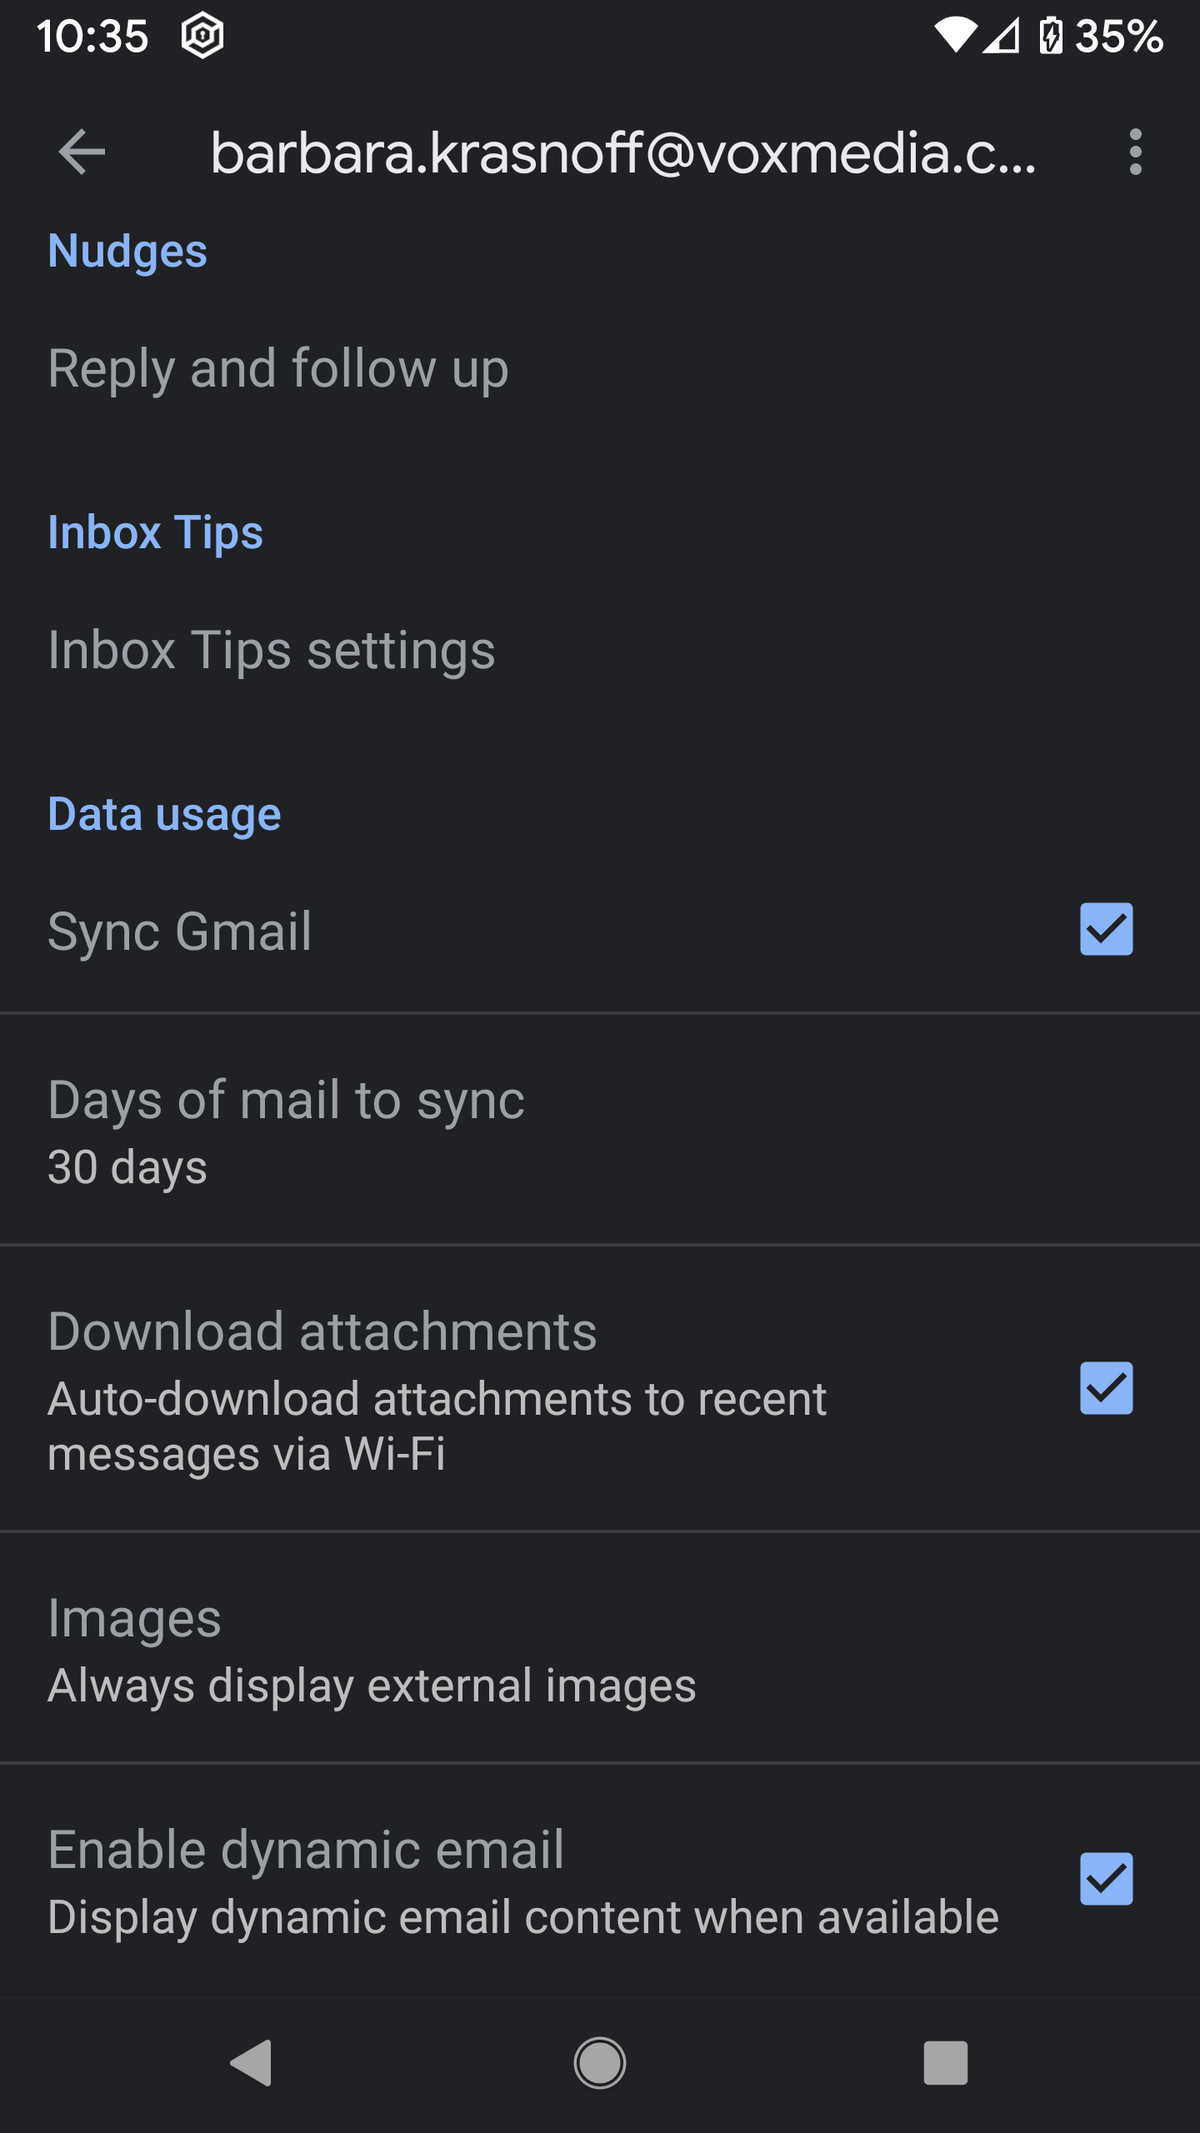 In Settings for your Gmail account, scroll down to “Images.”